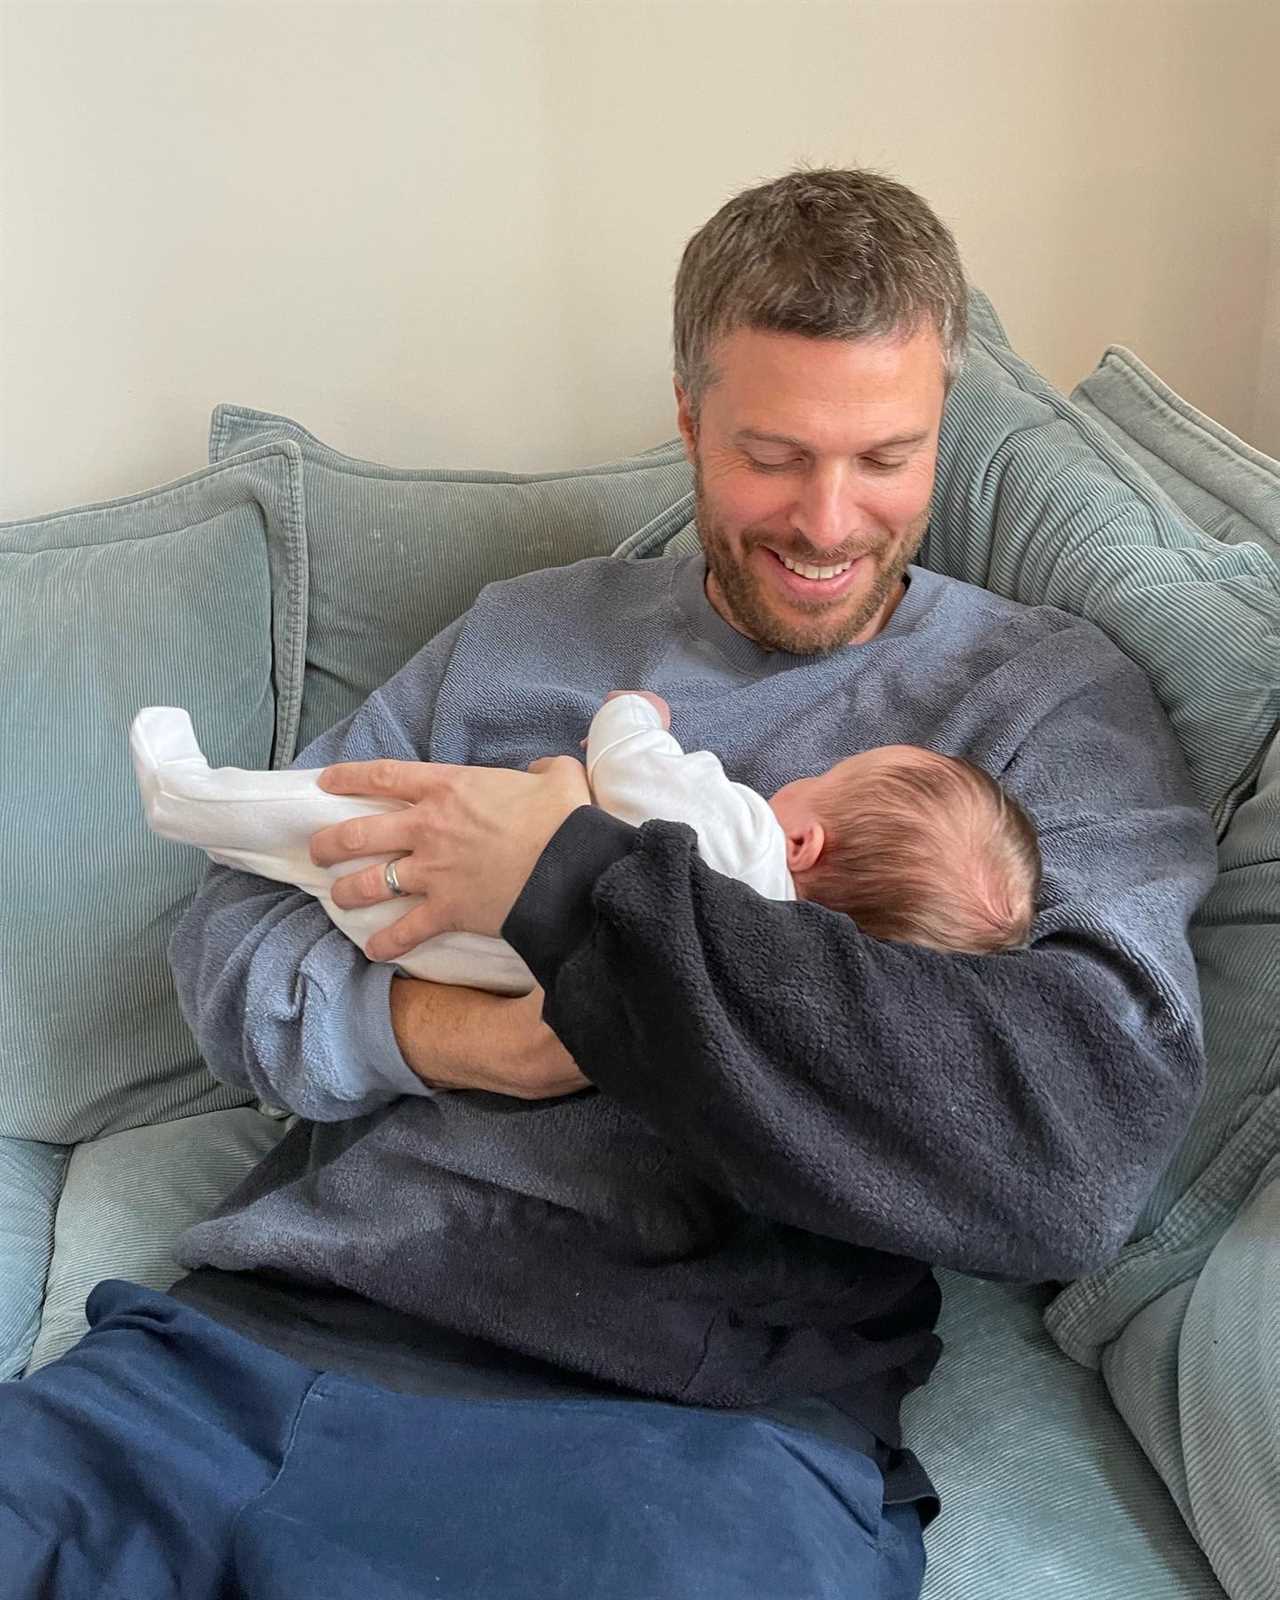 EastEnders star Emer Kenny reveals she’s given birth to first baby with husband Rick Edwards